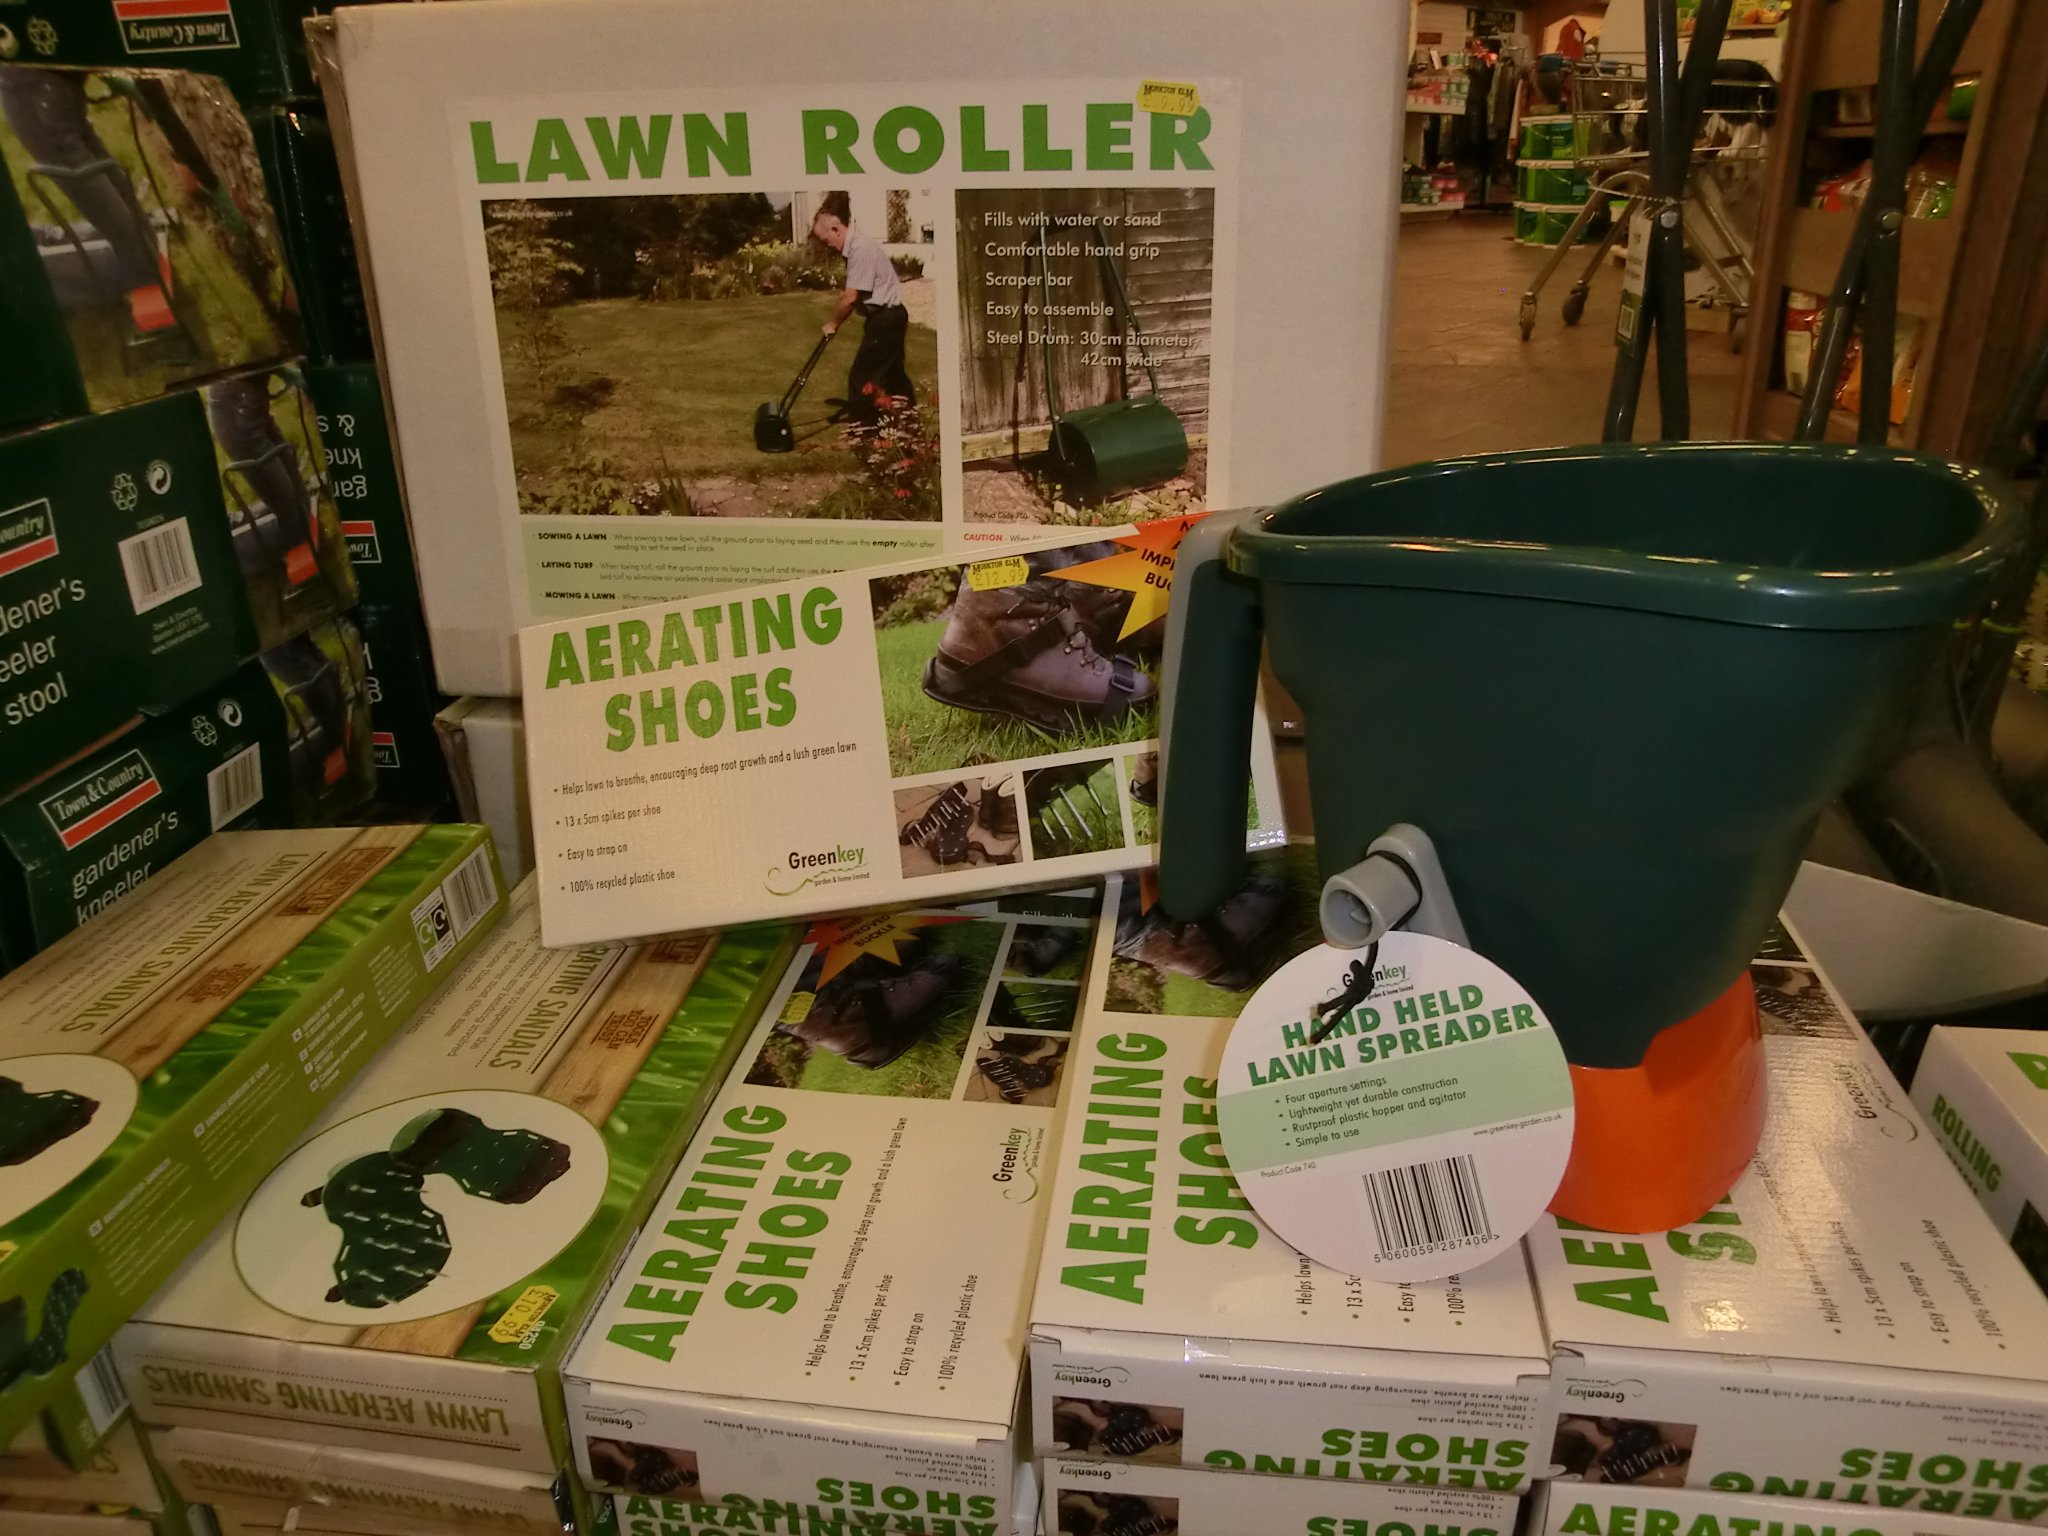 Give your autumn lawn tender, loving care